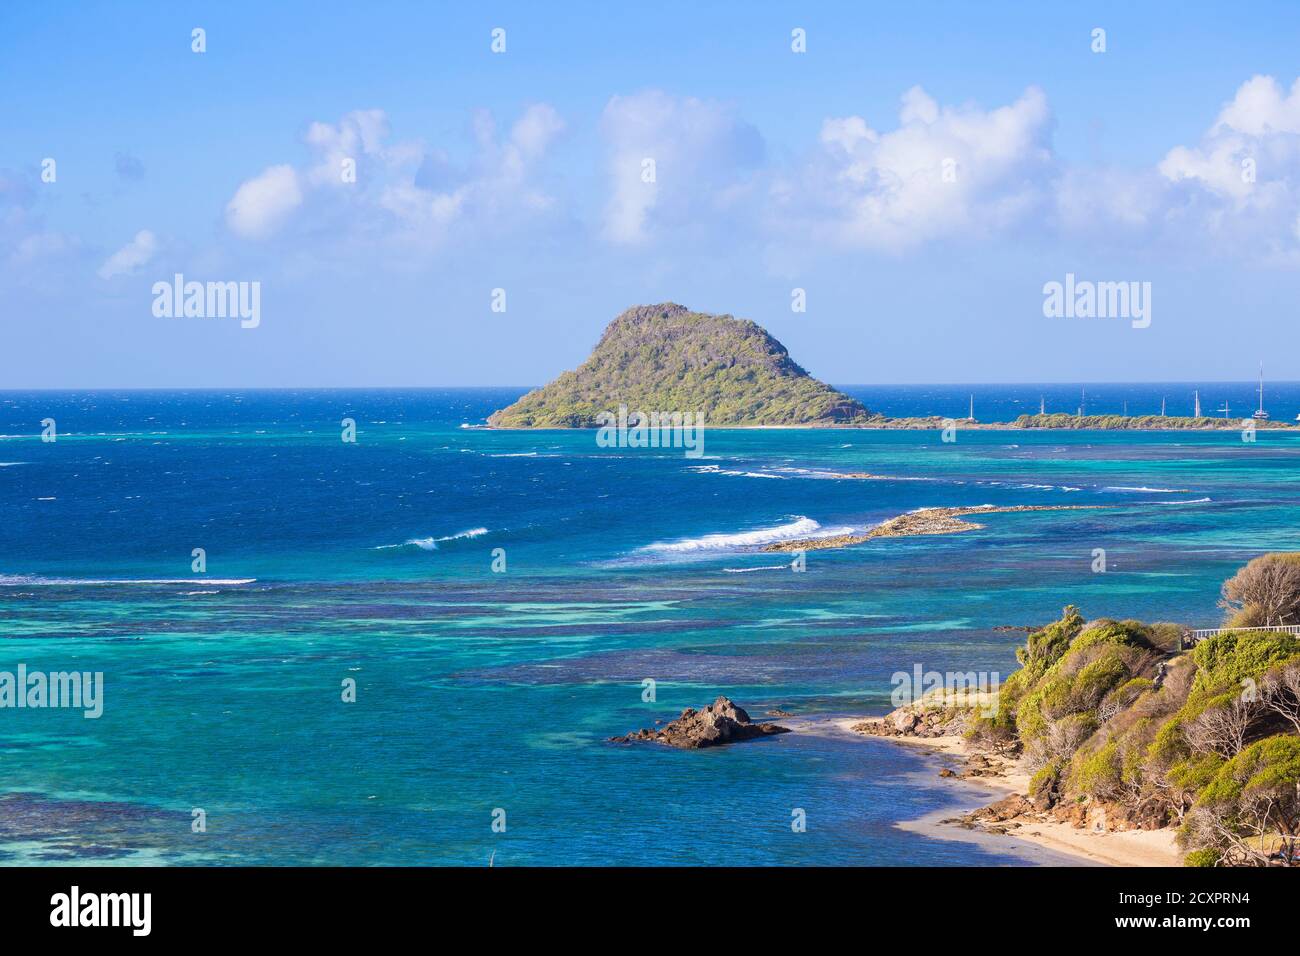 St Vincent and The Grenadines, Union Island, View towards Frigate Island Stock Photo